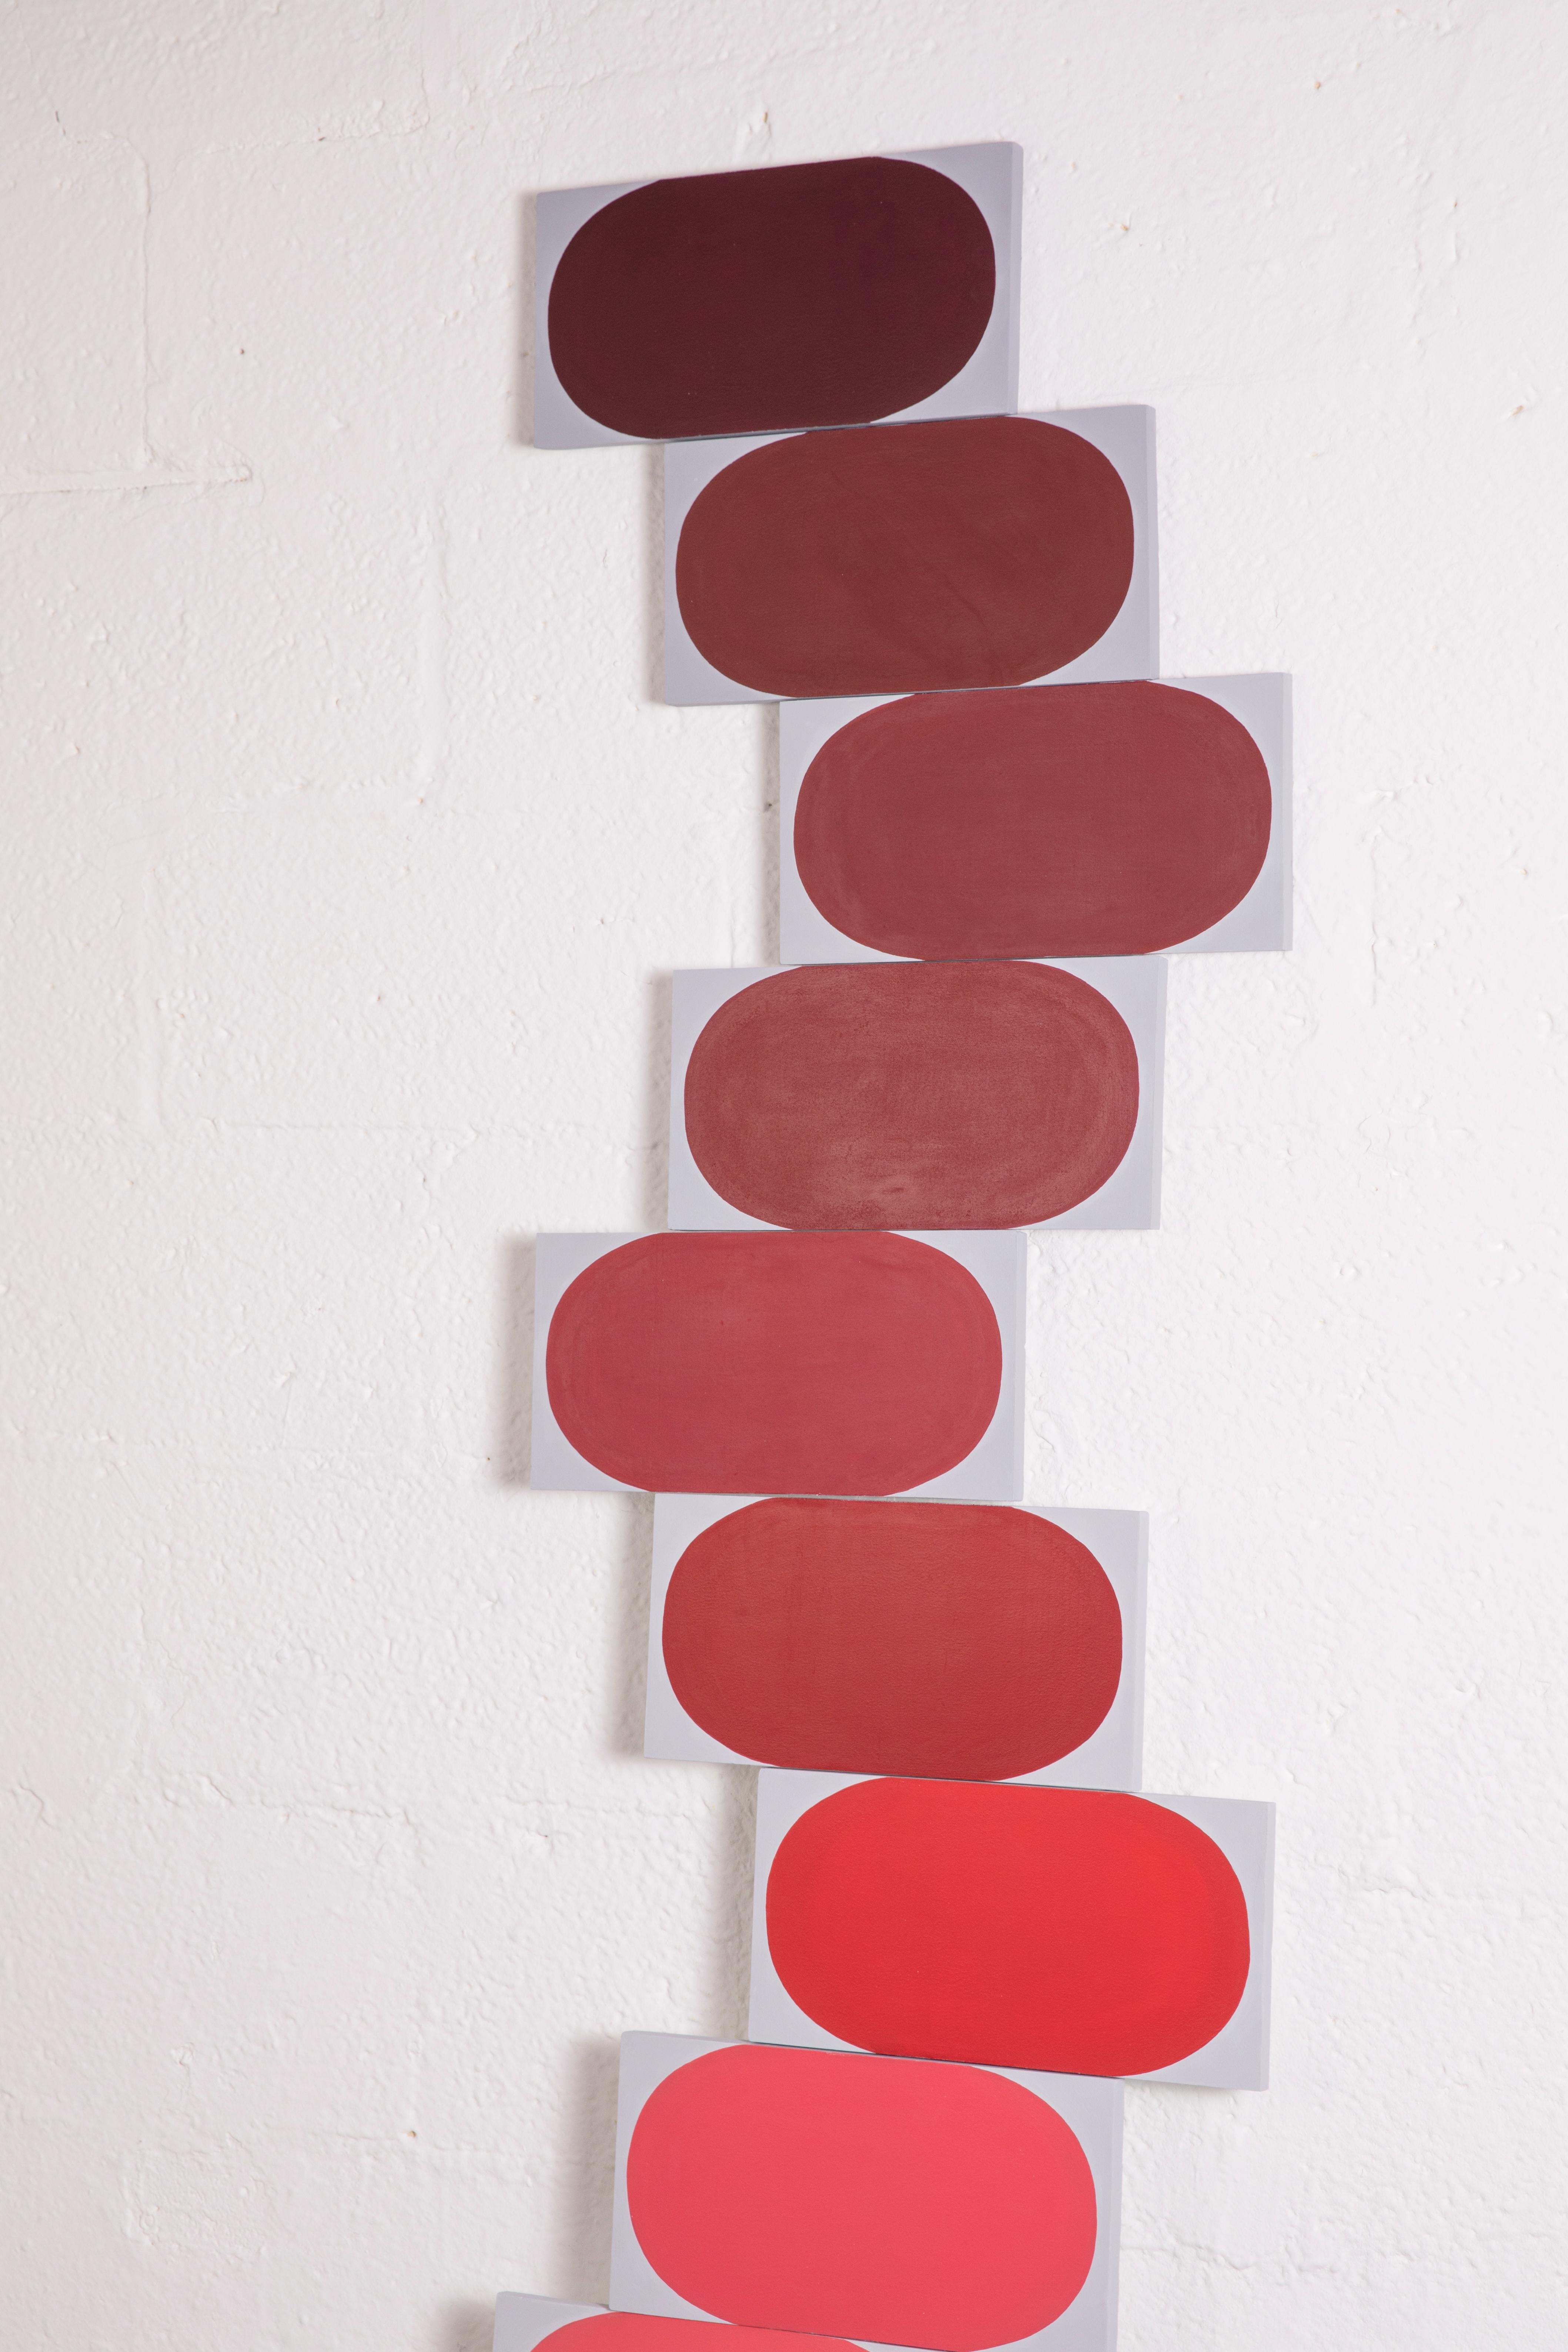 Xenzia -Contemporary Wall Hanging Sculpture, Red to Green 